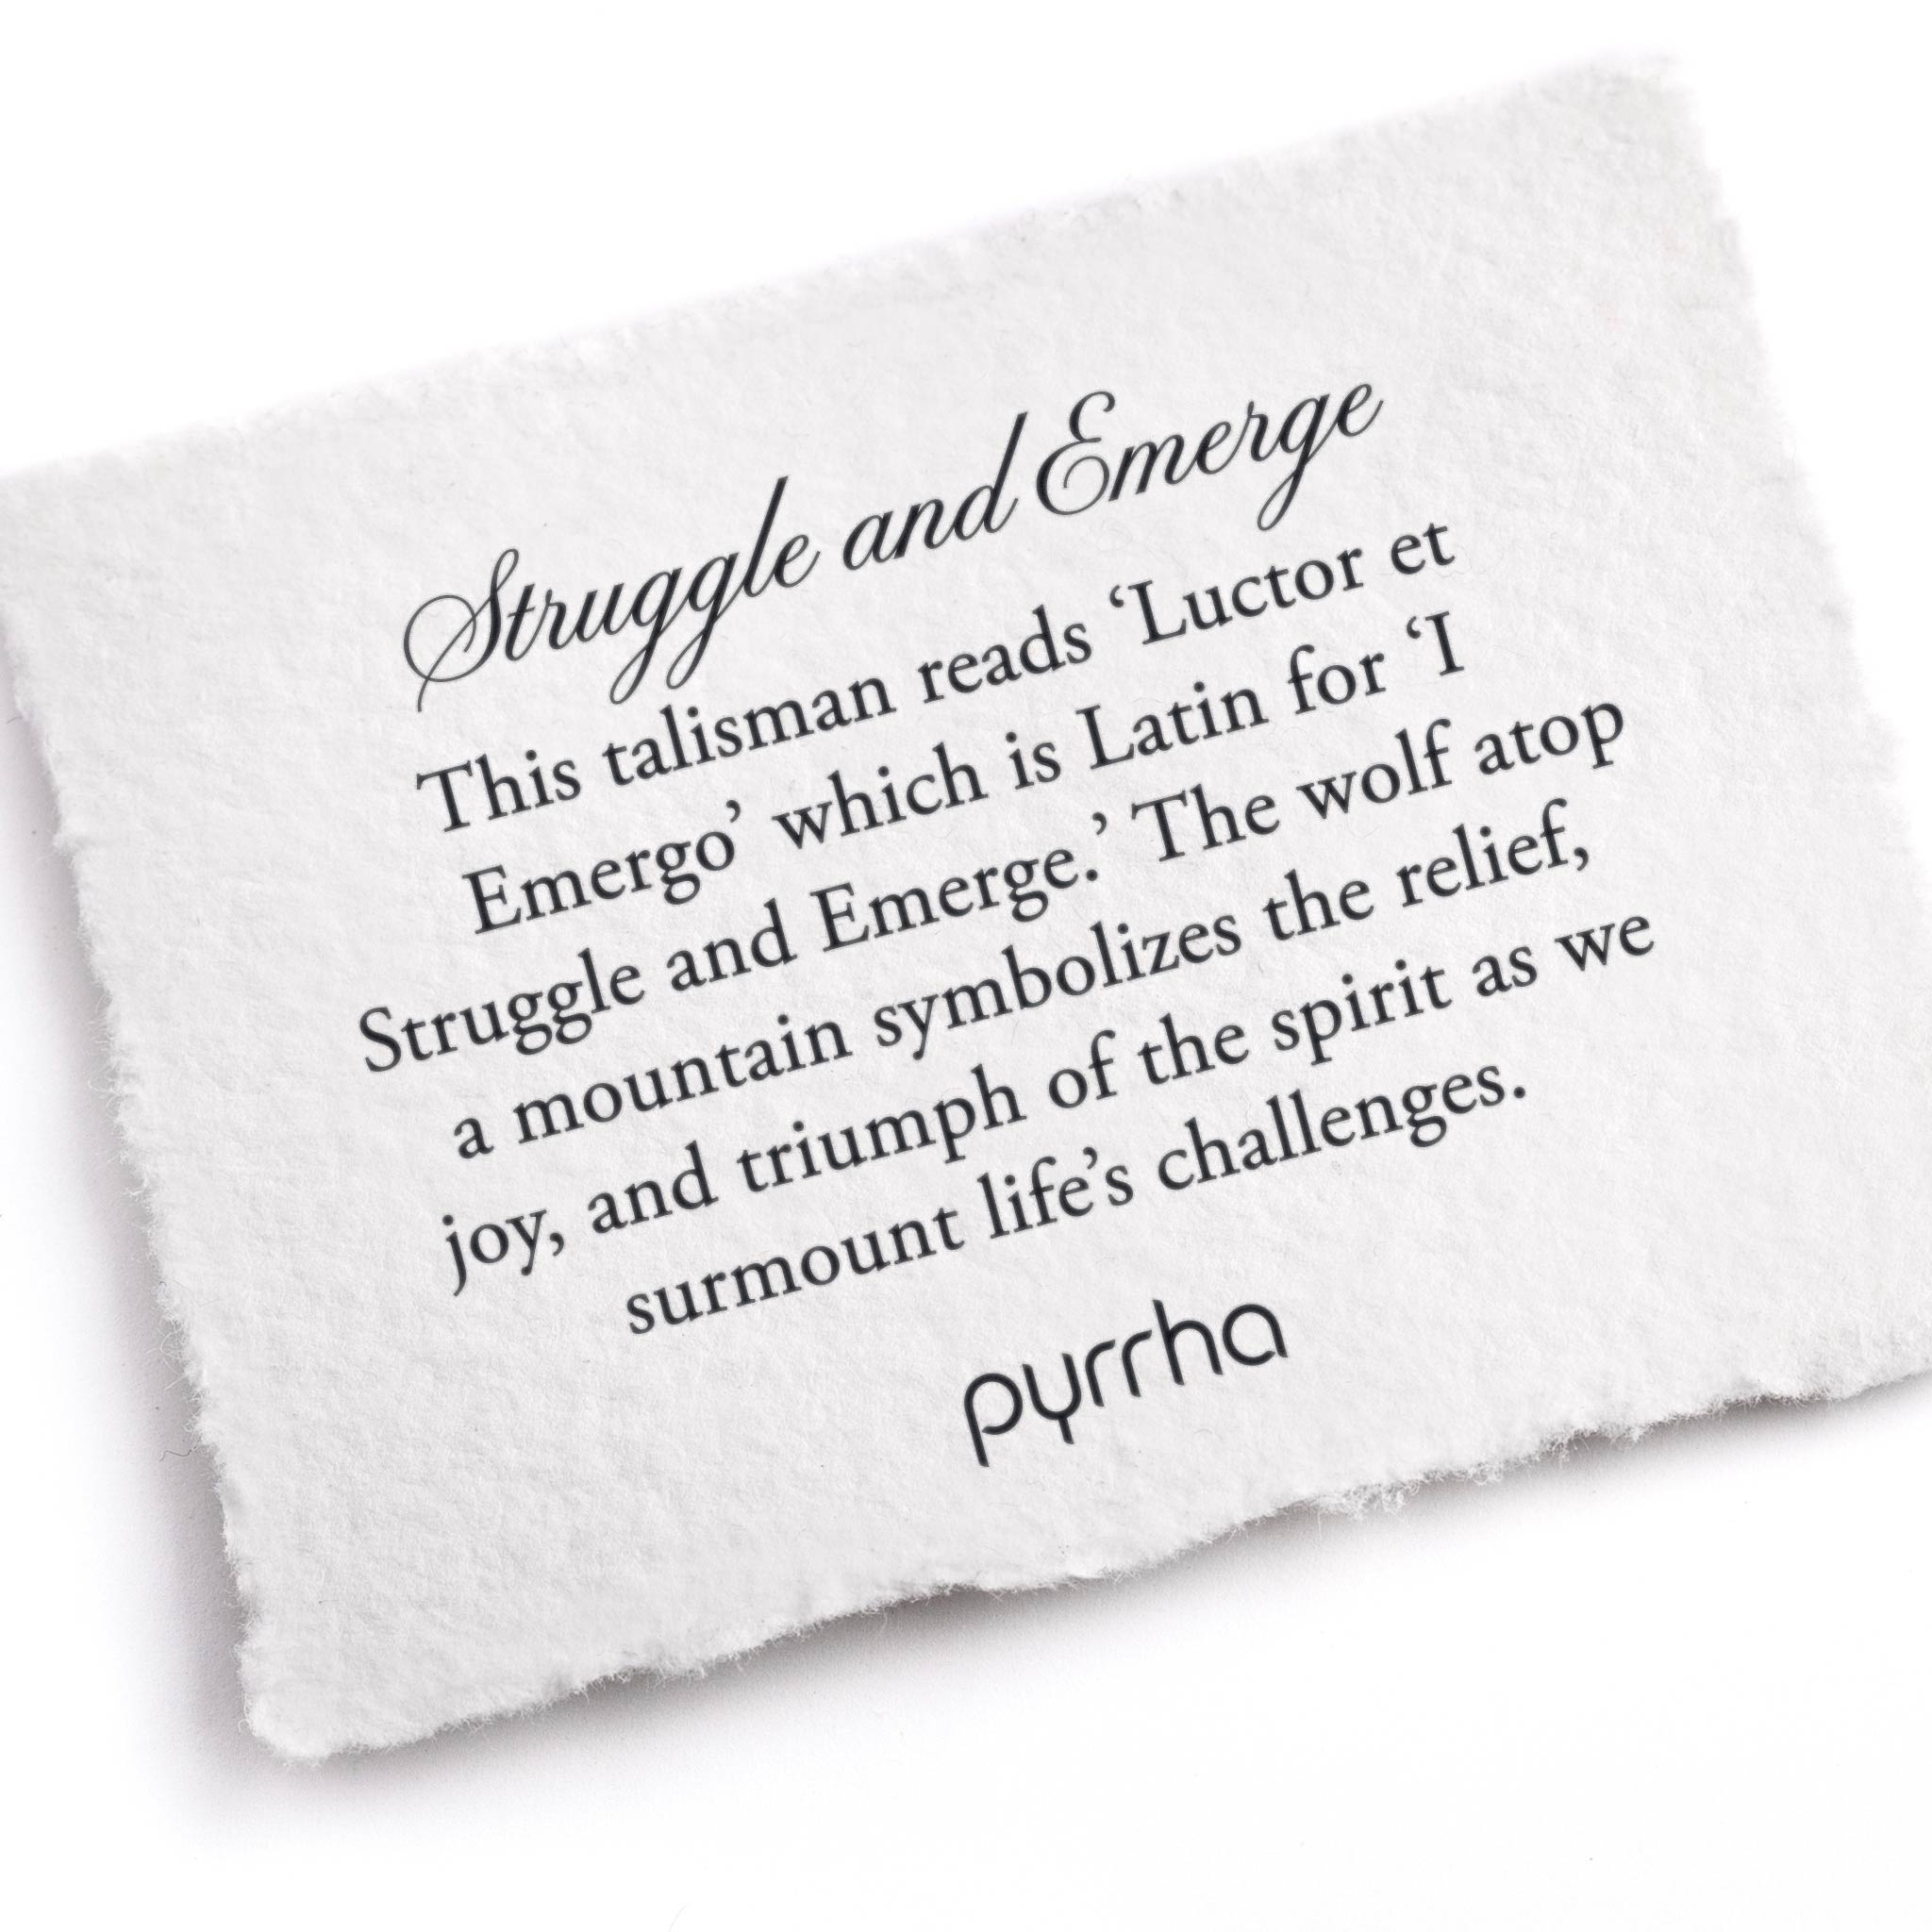 A hand-torn, letterpress printed card describing the meaning for Pyrrha's Struggle and Emerge Talisman Necklace